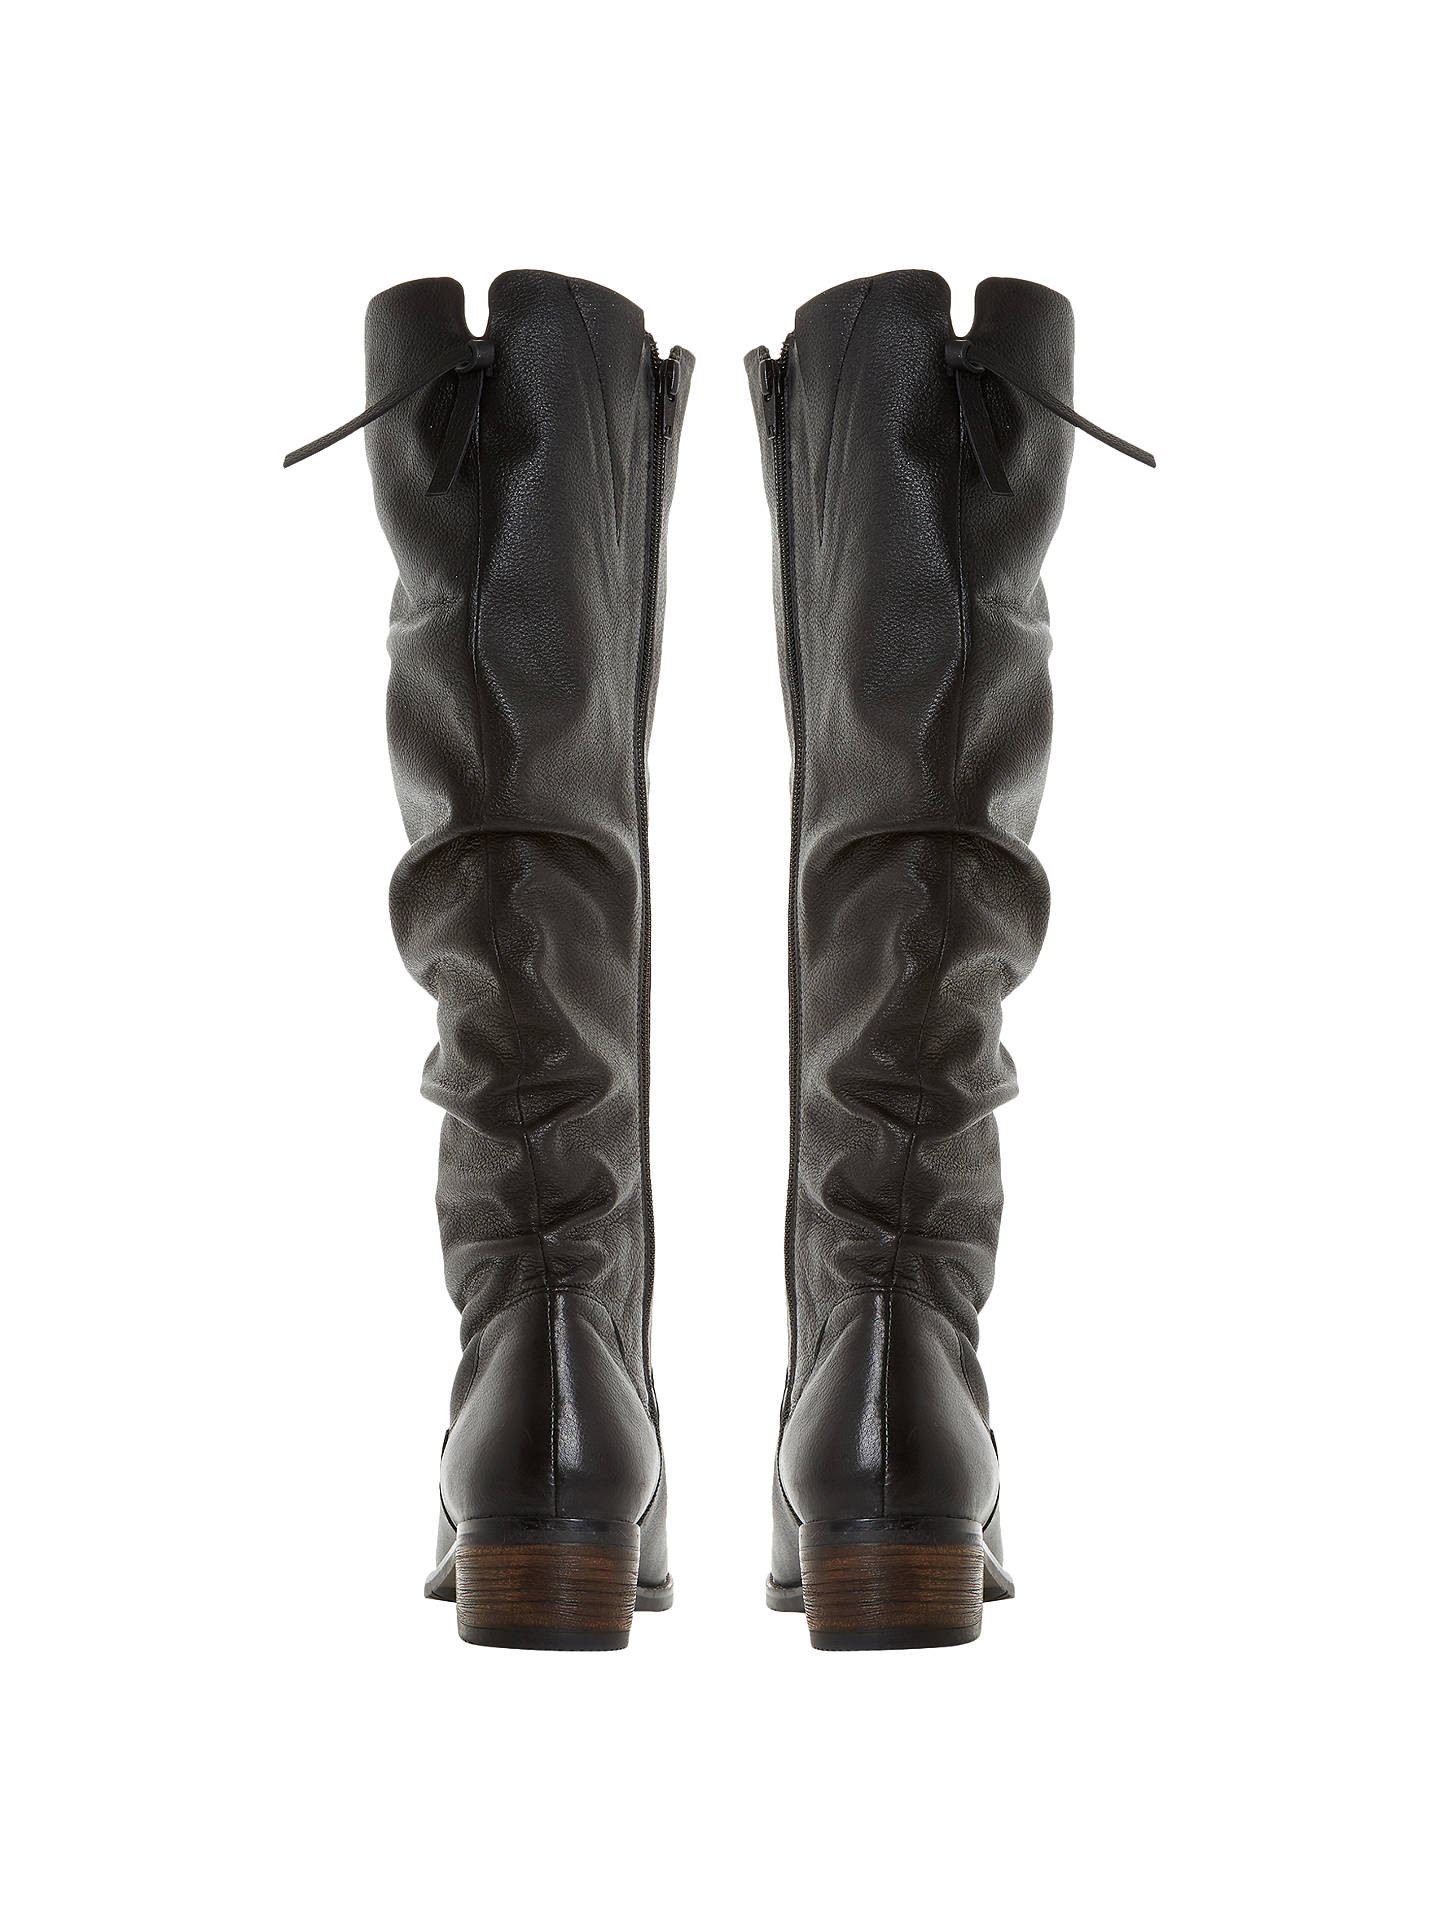 23 Recommended Resin Cowboy Boot Vase 2024 free download resin cowboy boot vase of dune tabatha knee high slouch boots at john lewis partners pertaining to buydune tabatha knee high slouch boots black leather 3 online at johnlewis com